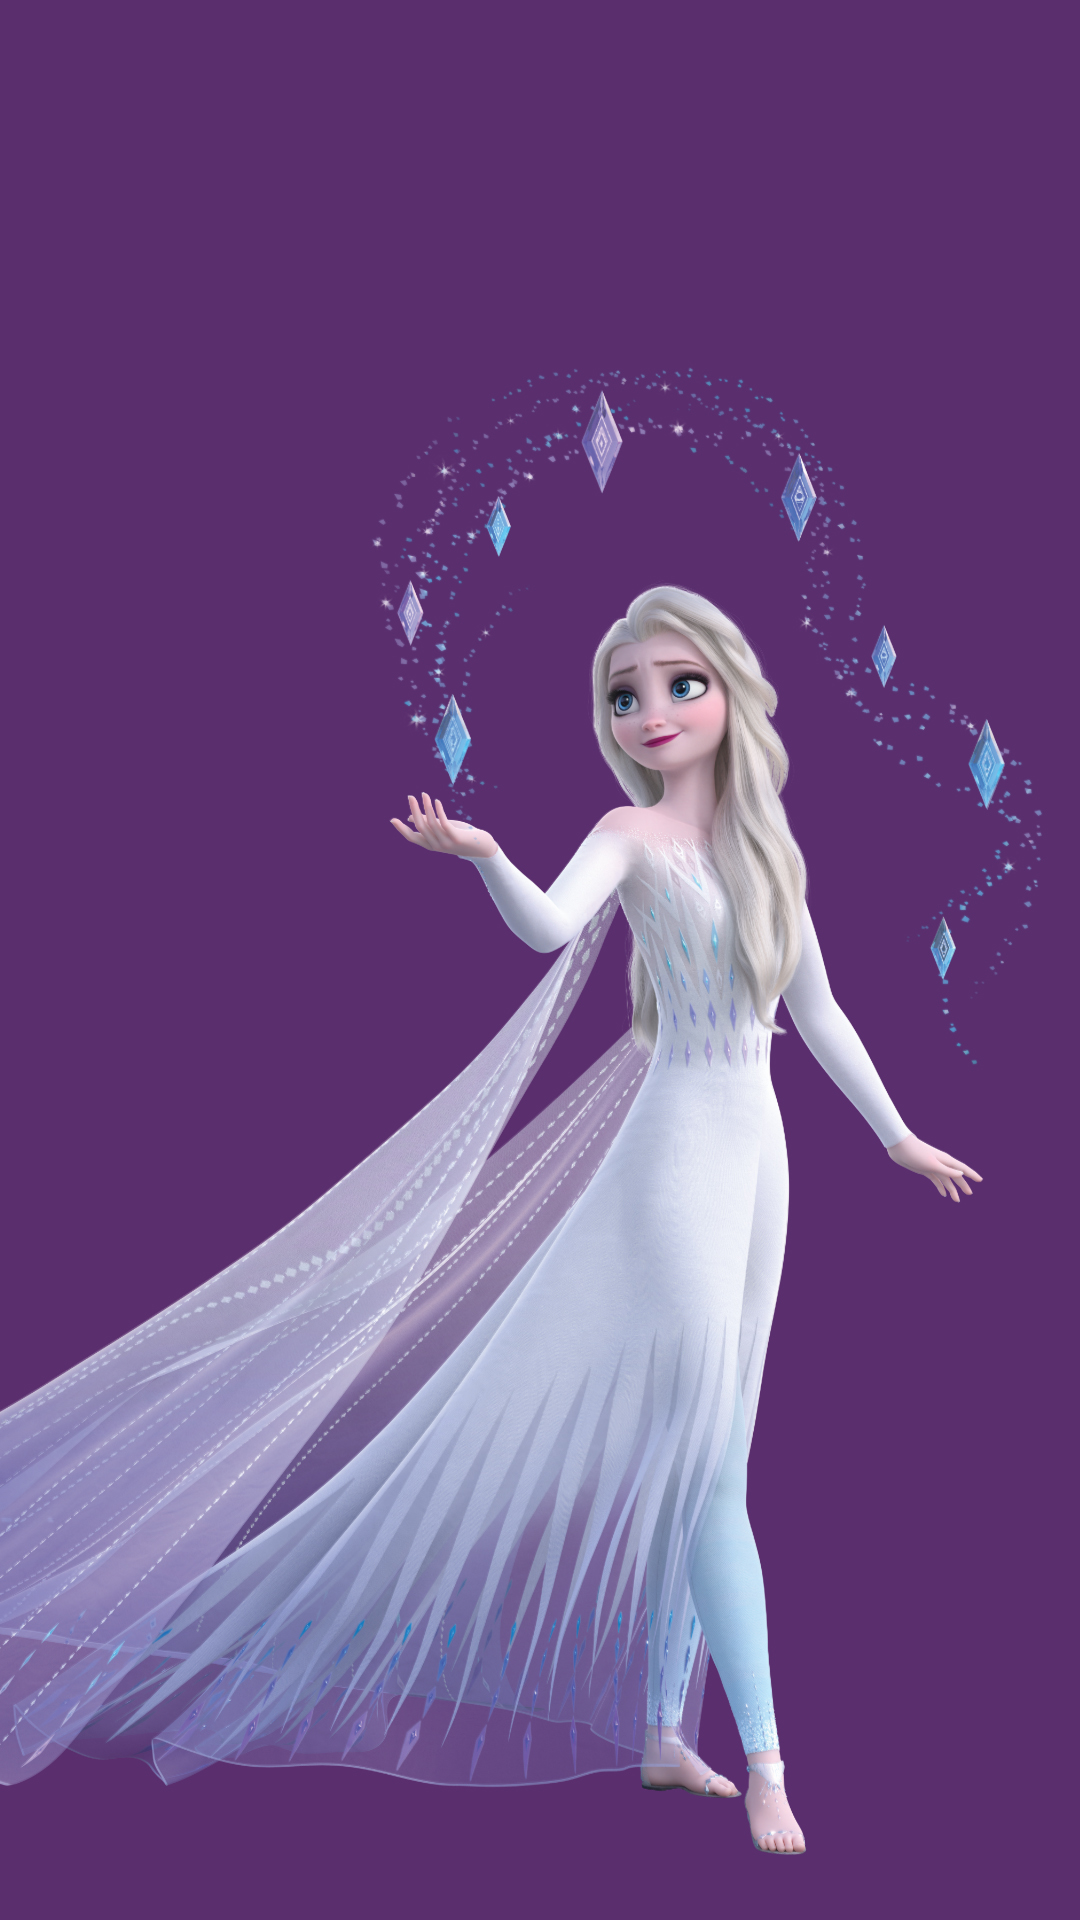 Disney Frozen 2 first HD wallpapers  YouLoveItcom